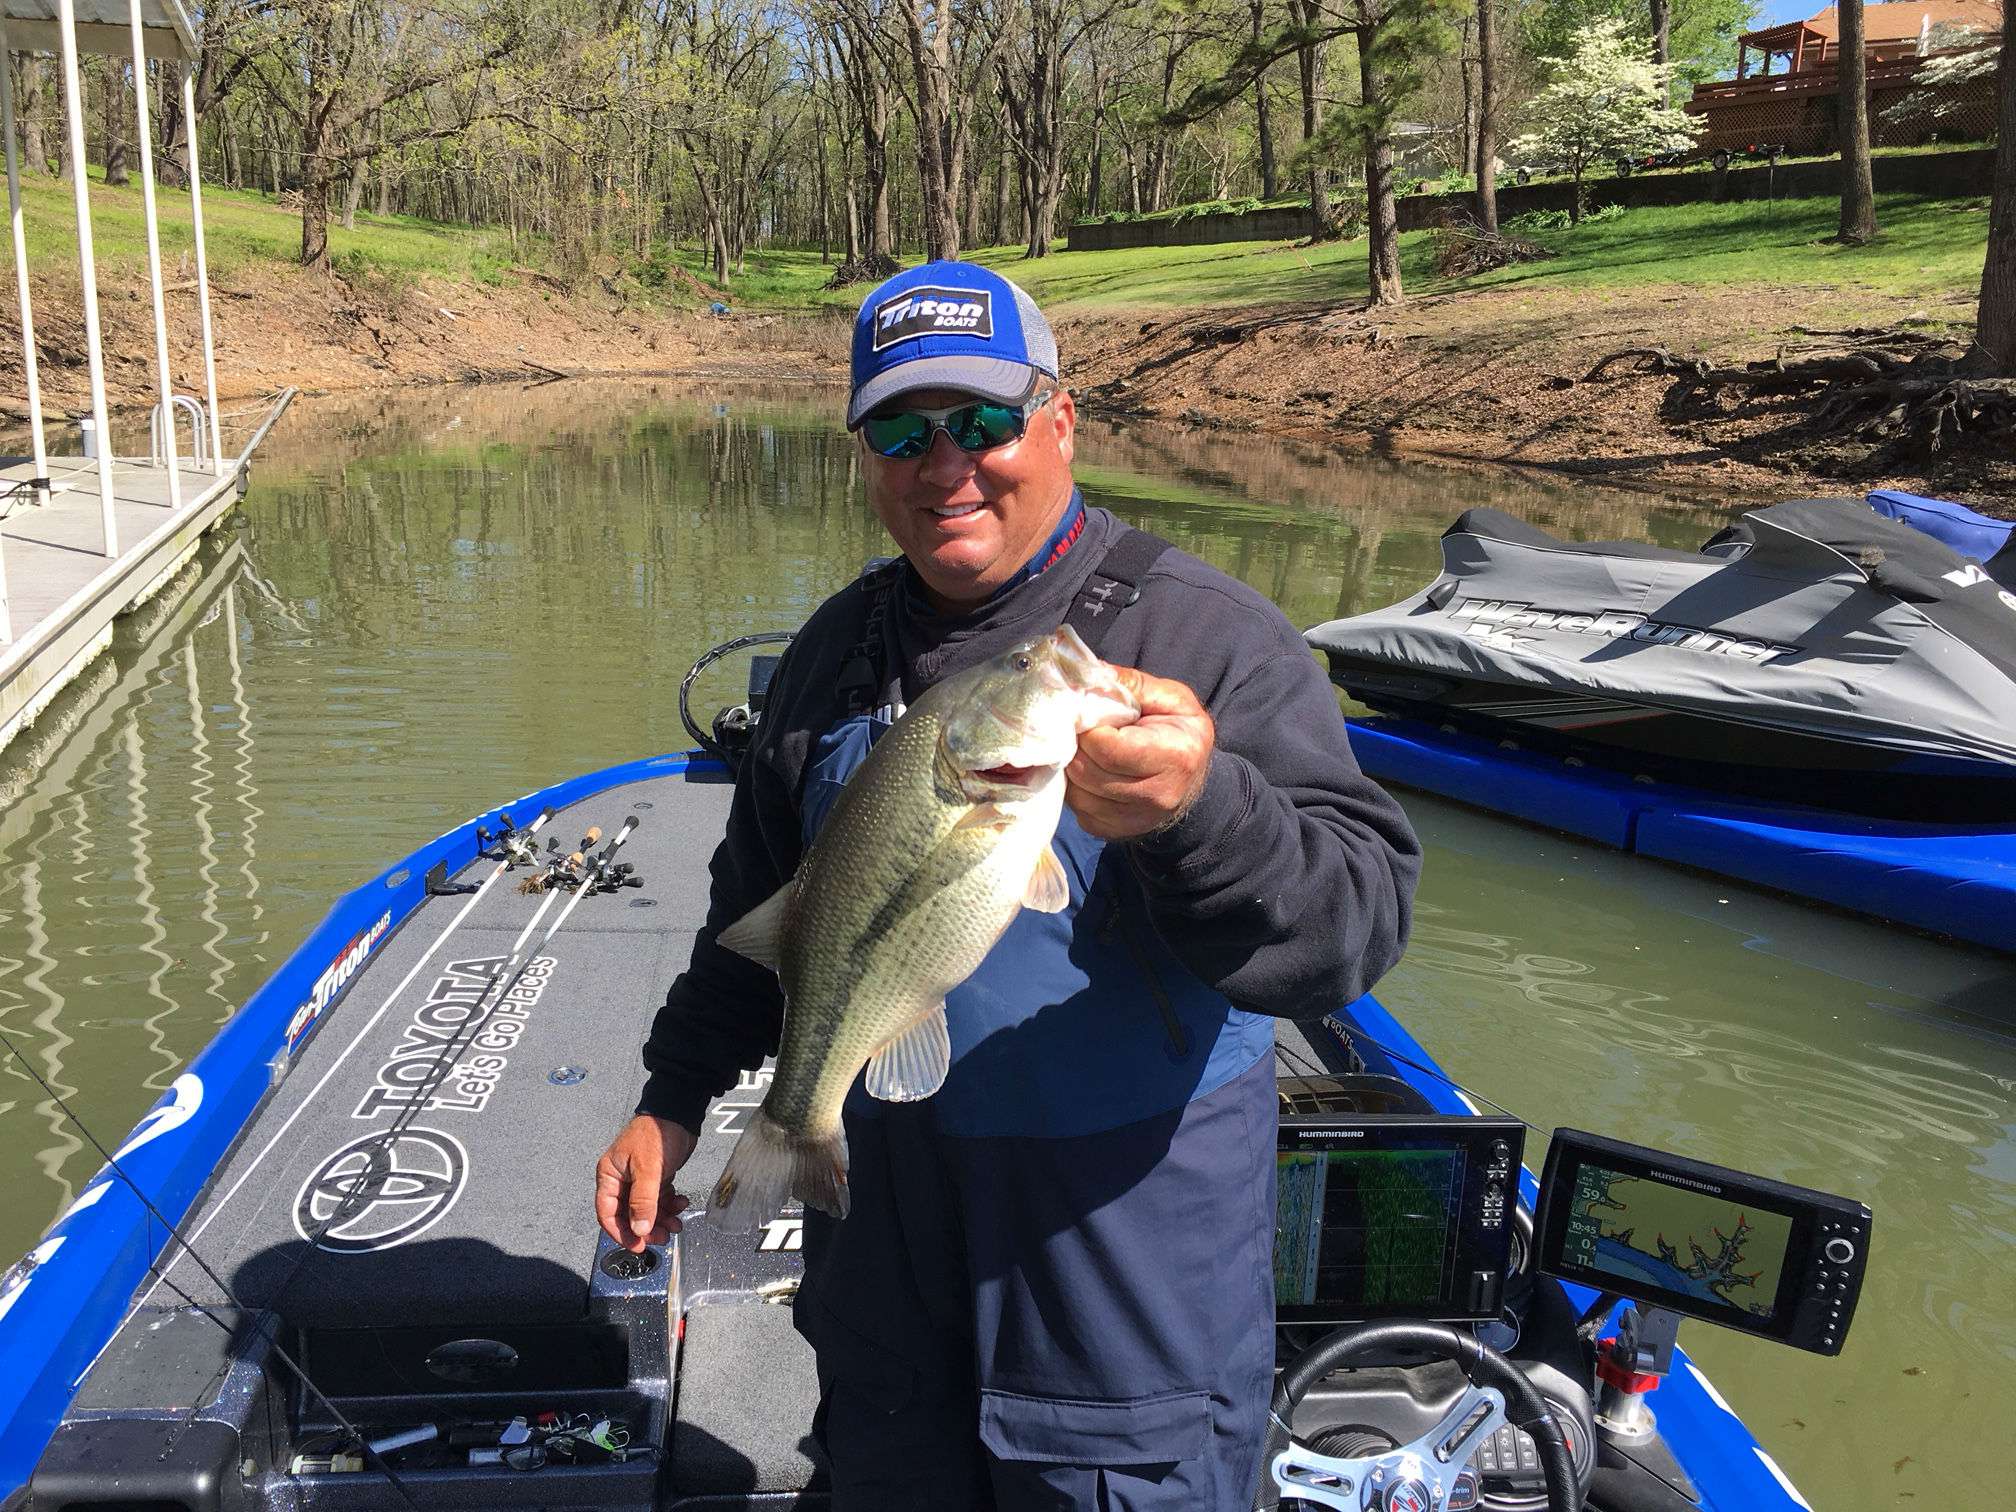 Terry Scroggins is figuring something out. Two bites in 5 minutes. Including this nice 3-pound chunk.

